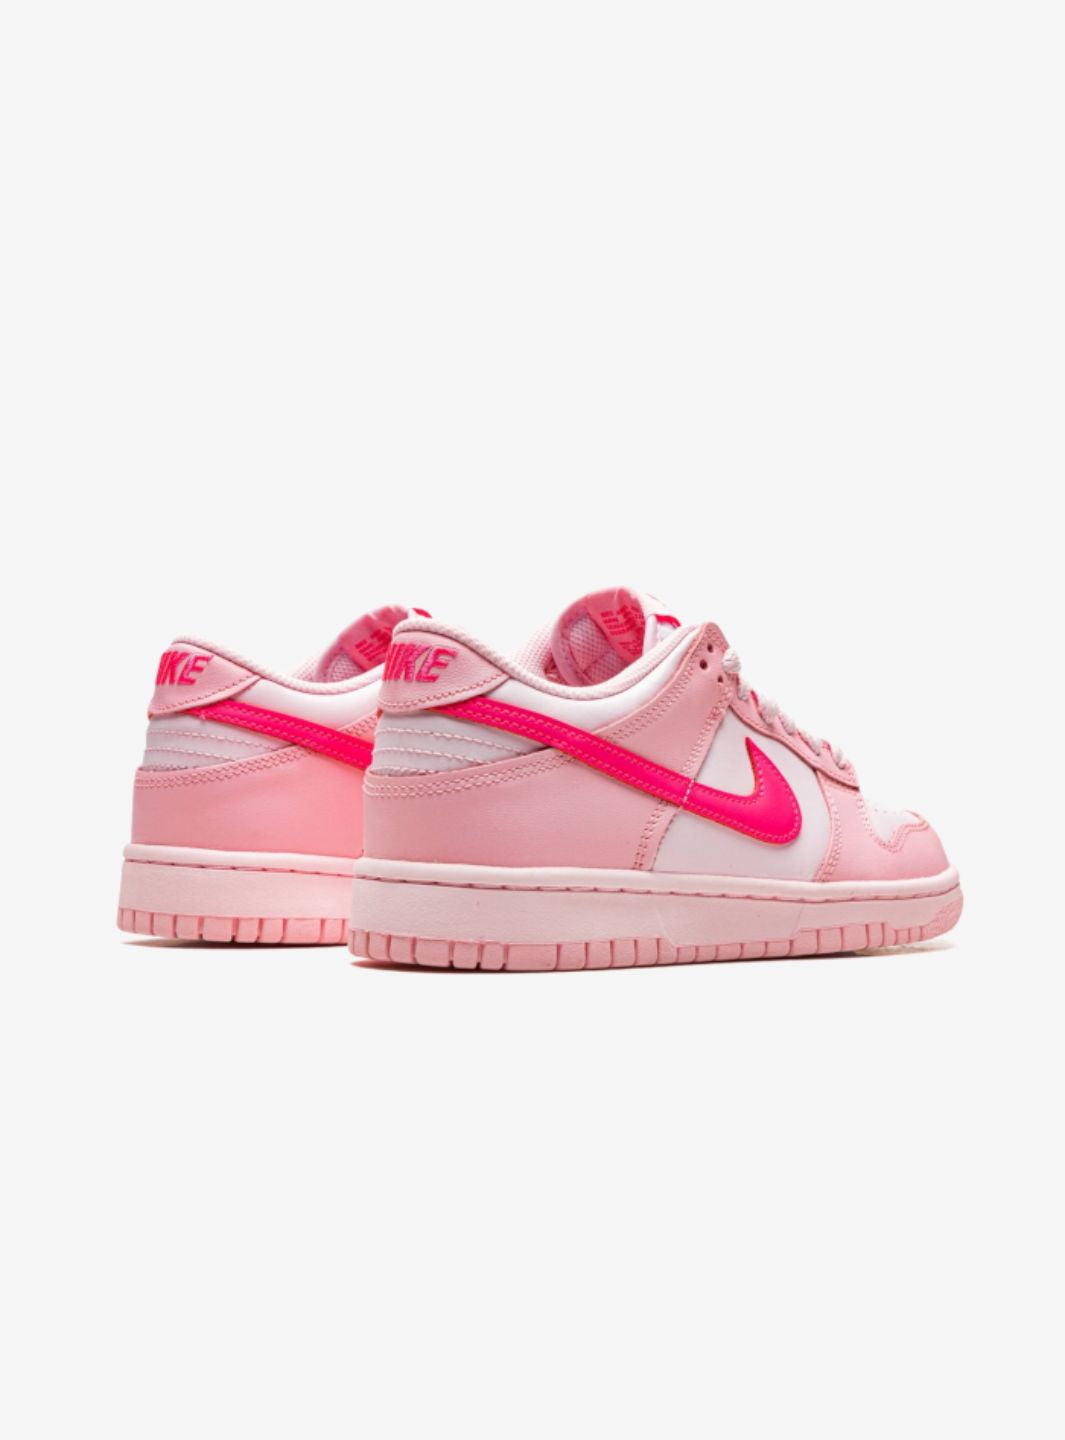 Nike Dunk Low Triple Pink - DH9765-600 | ResellZone